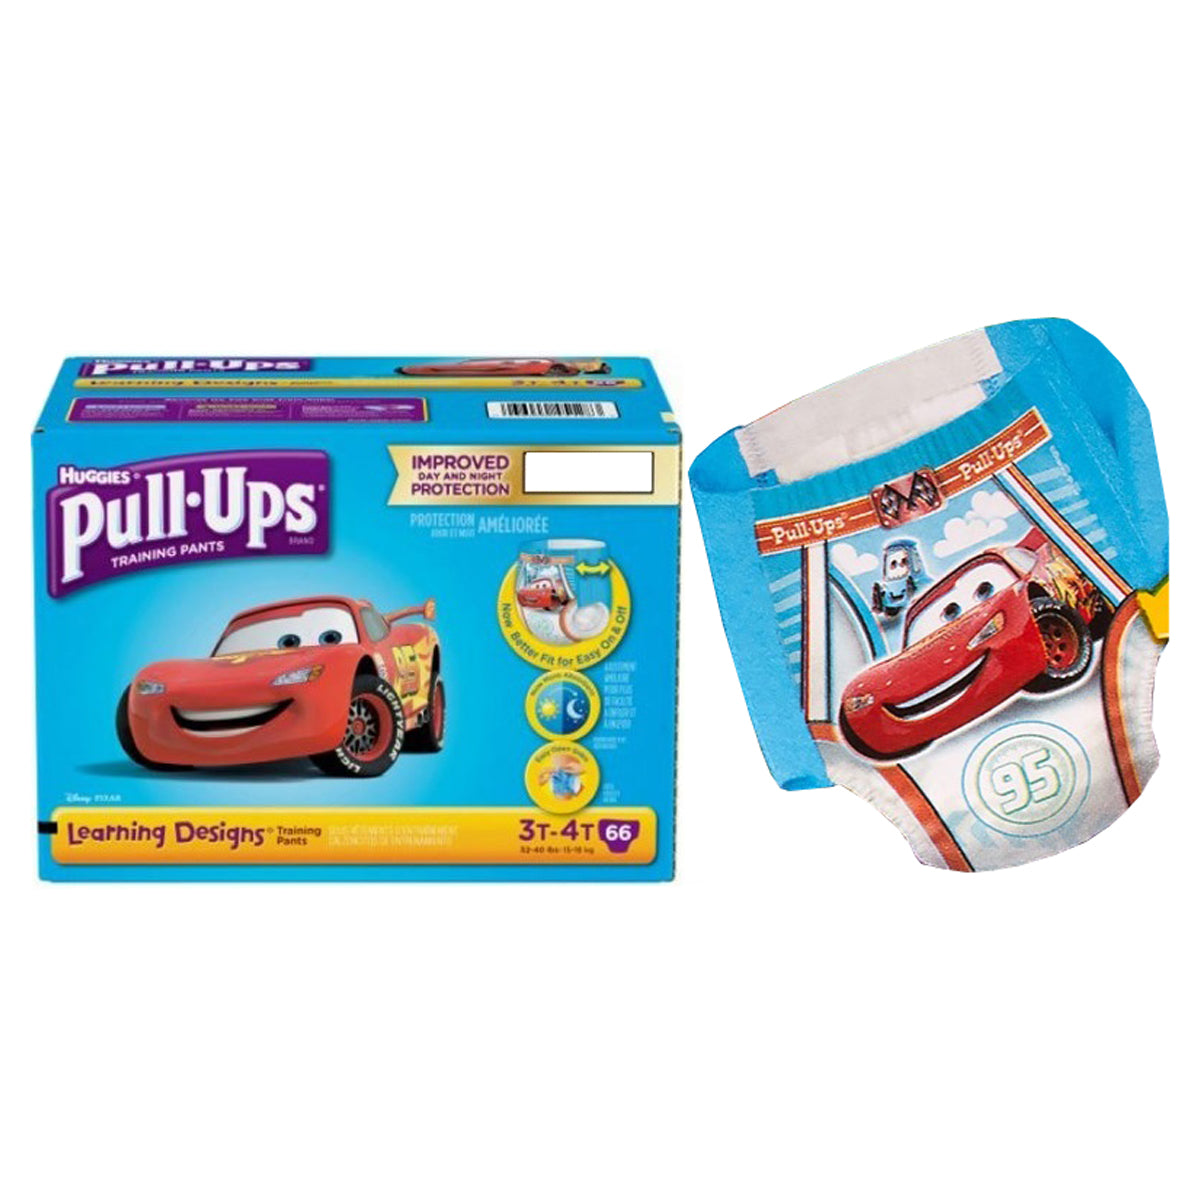 Huggies Pull-Ups Learning Designs - Boys reviews in Diapers - Disposable  Diapers - ChickAdvisor